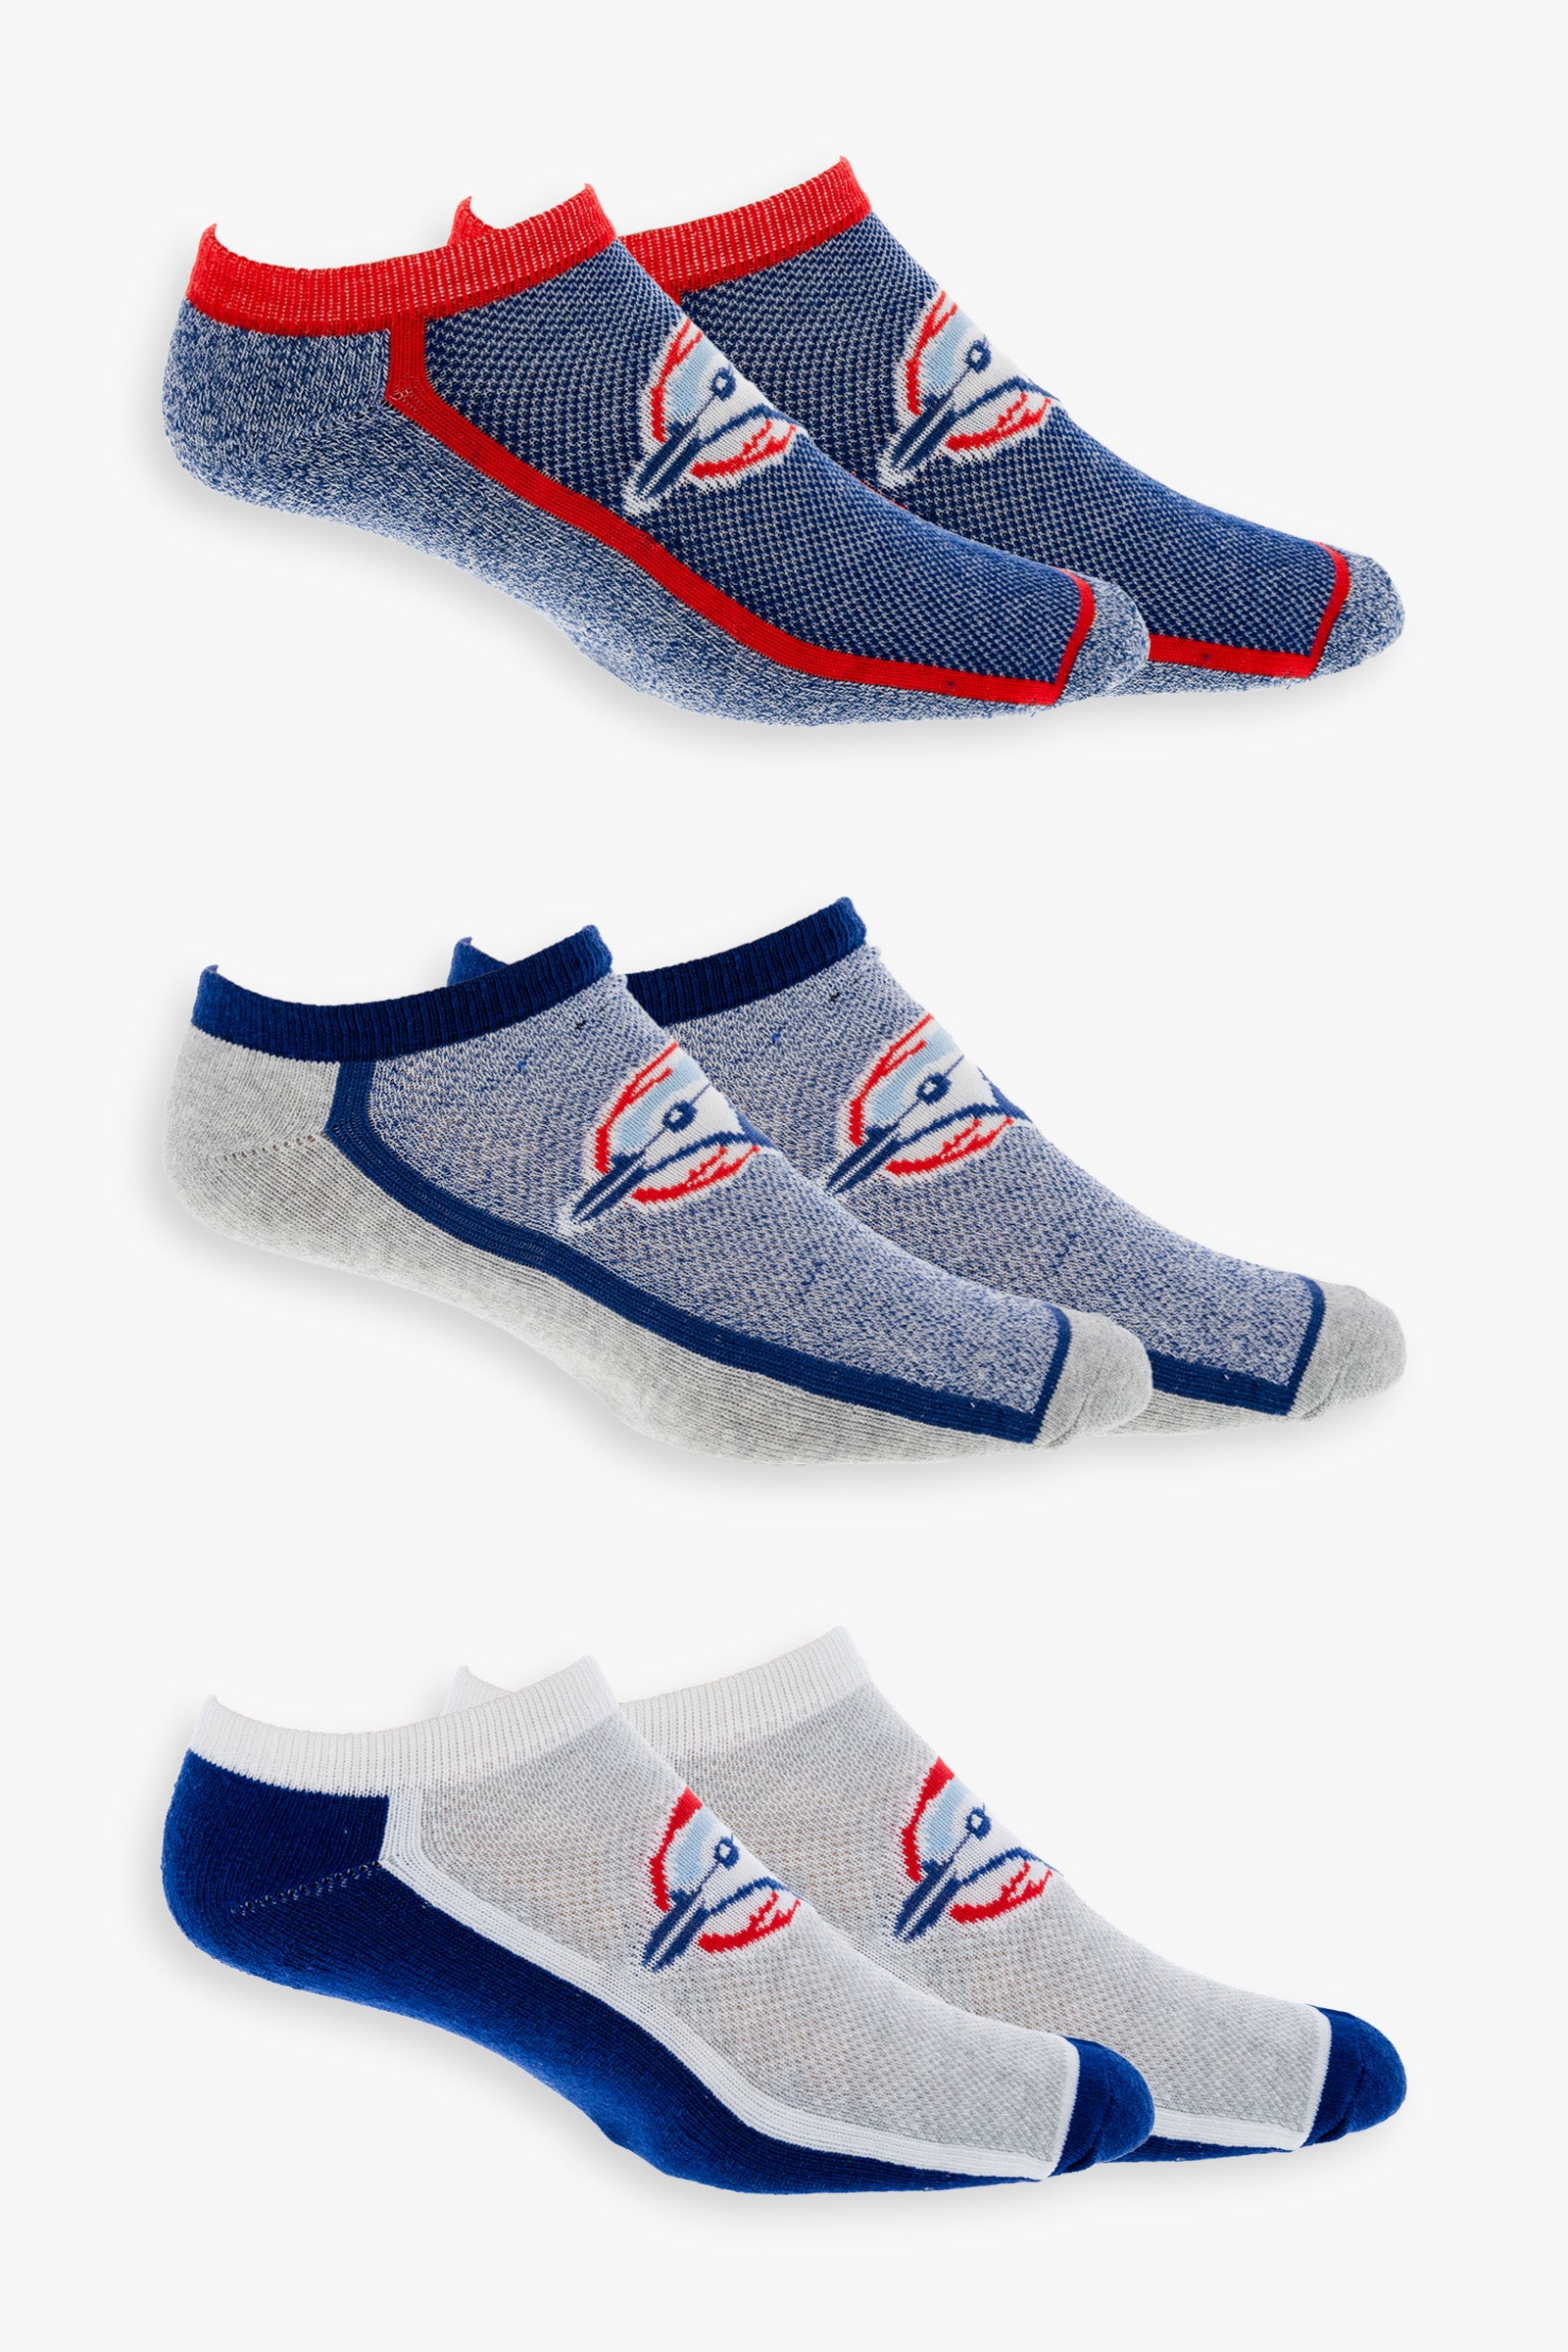 Gertex MLB Toronto Blue Jays Men's 3-Pack Cooperstown Collection No Show Ankle Socks